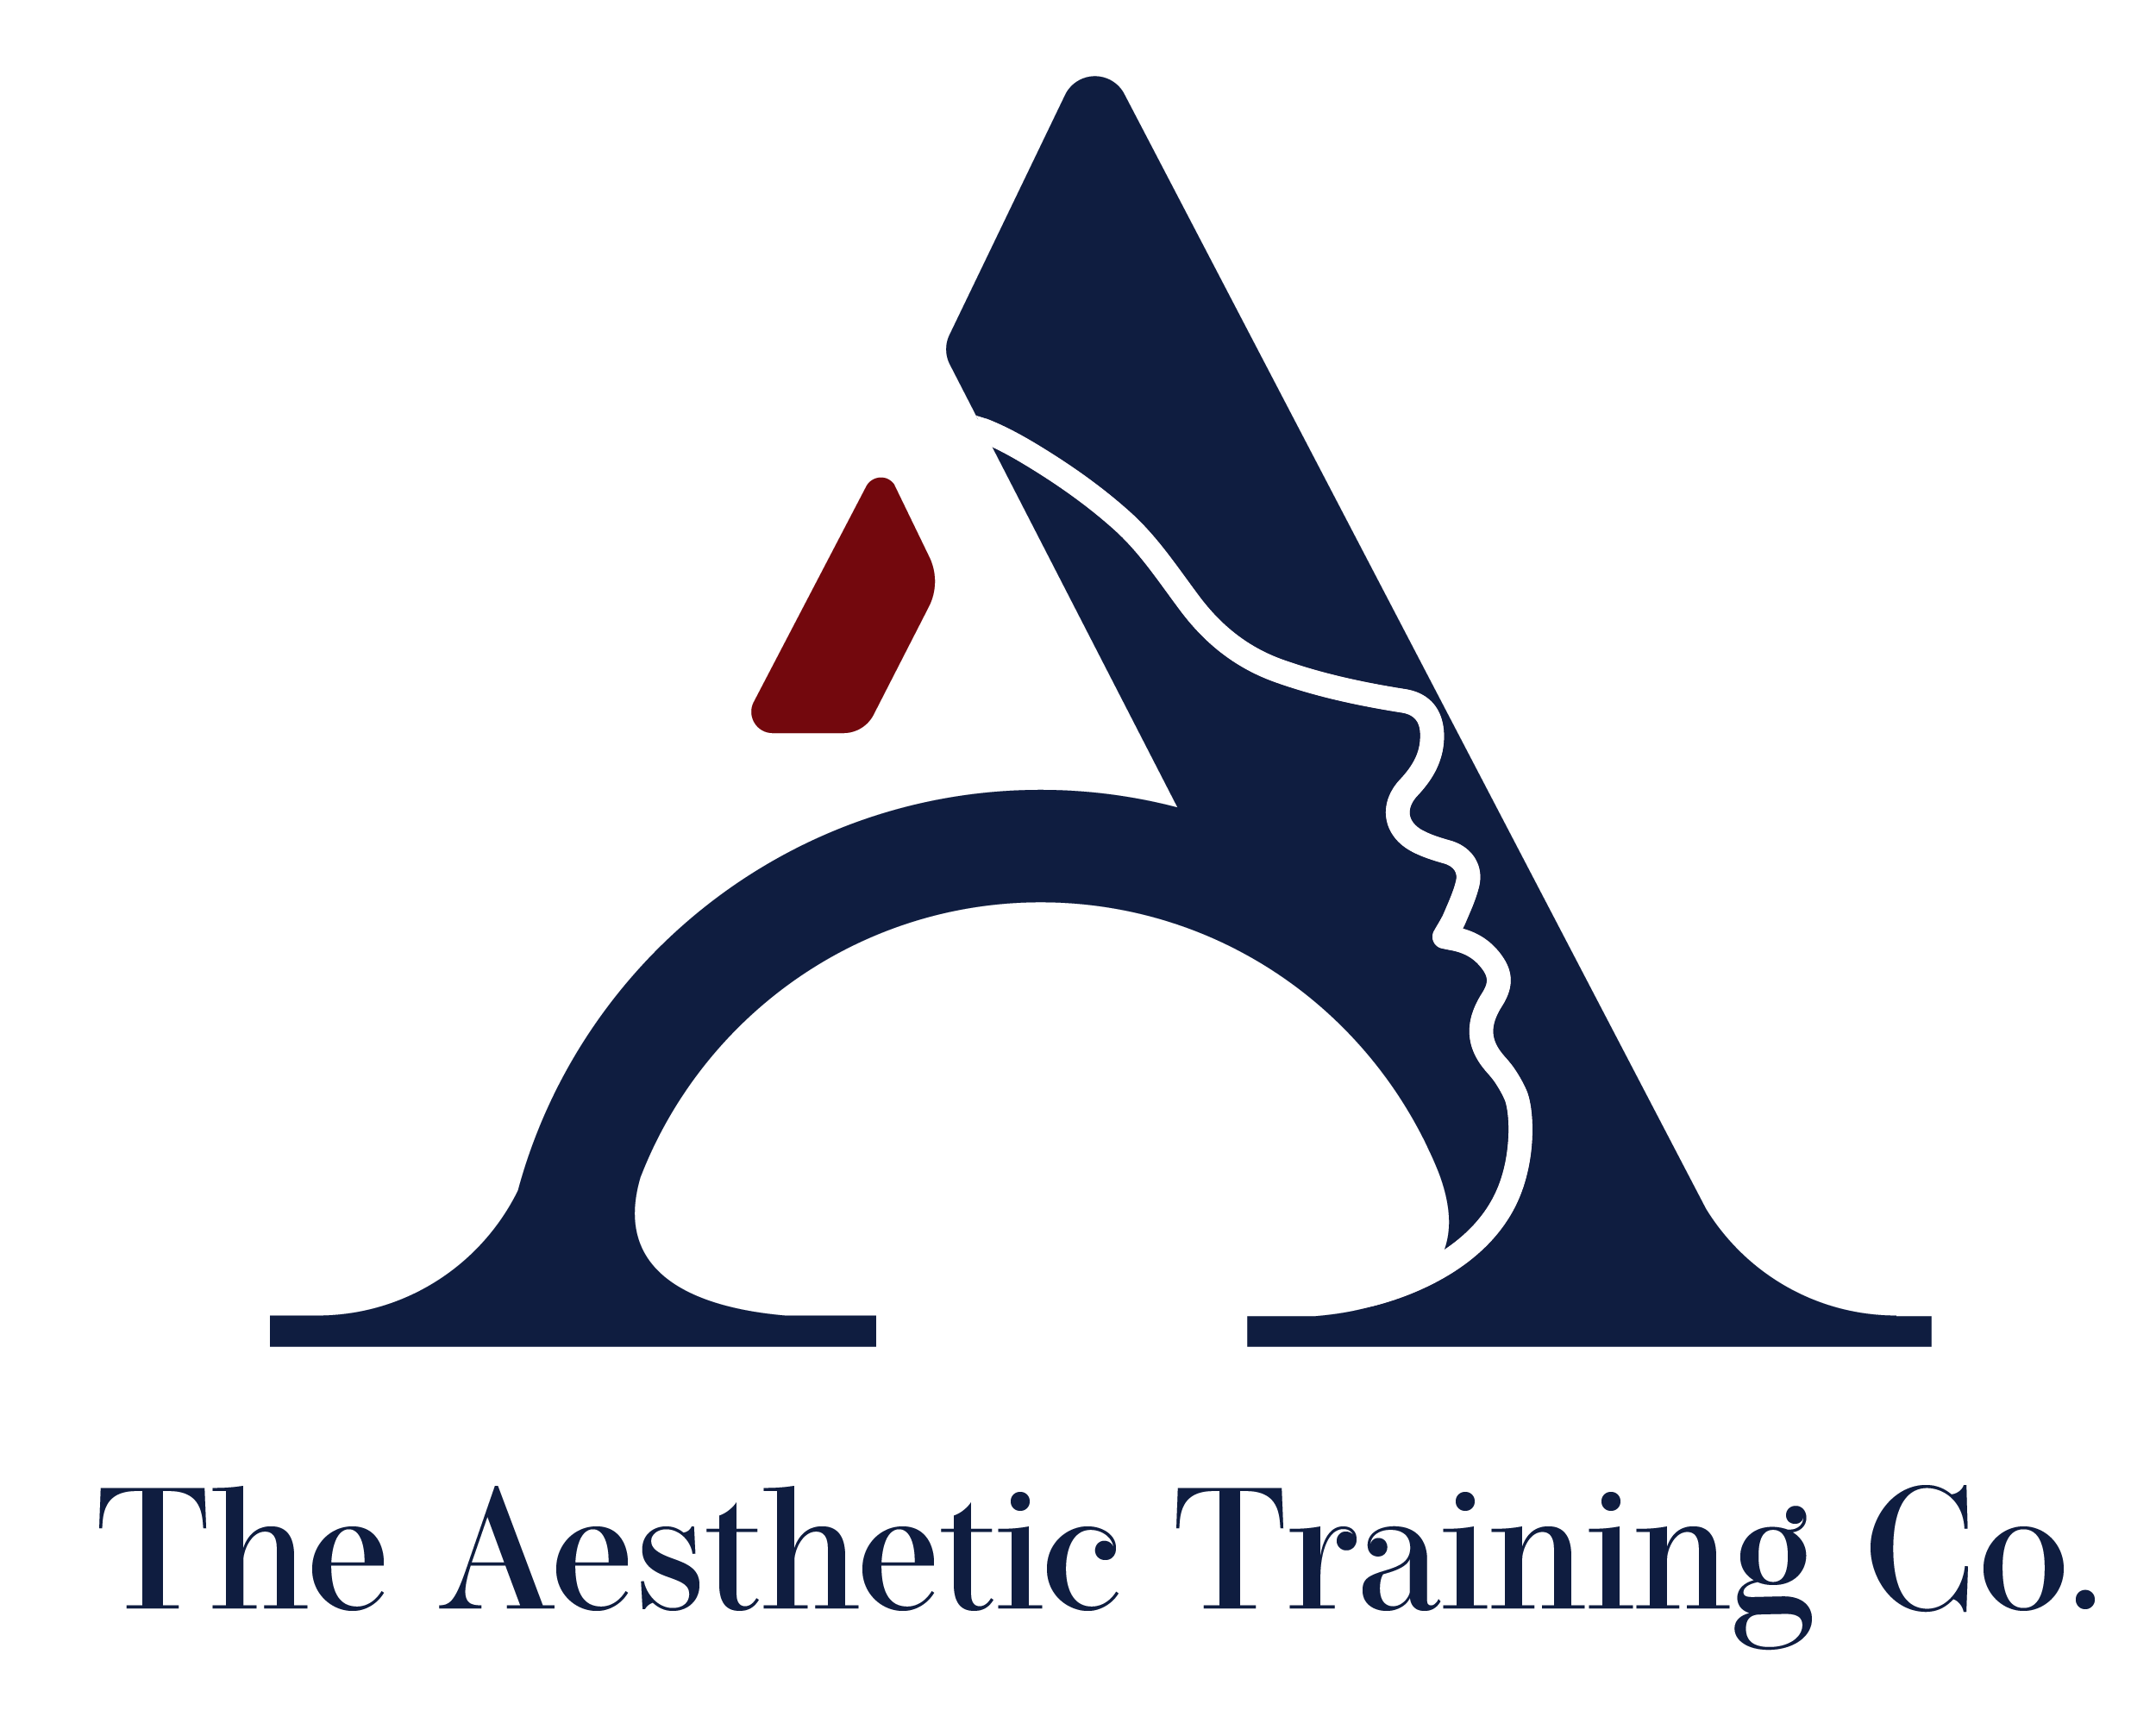 Foundation Combined Botulinum Toxin and Dermal Filler Course 